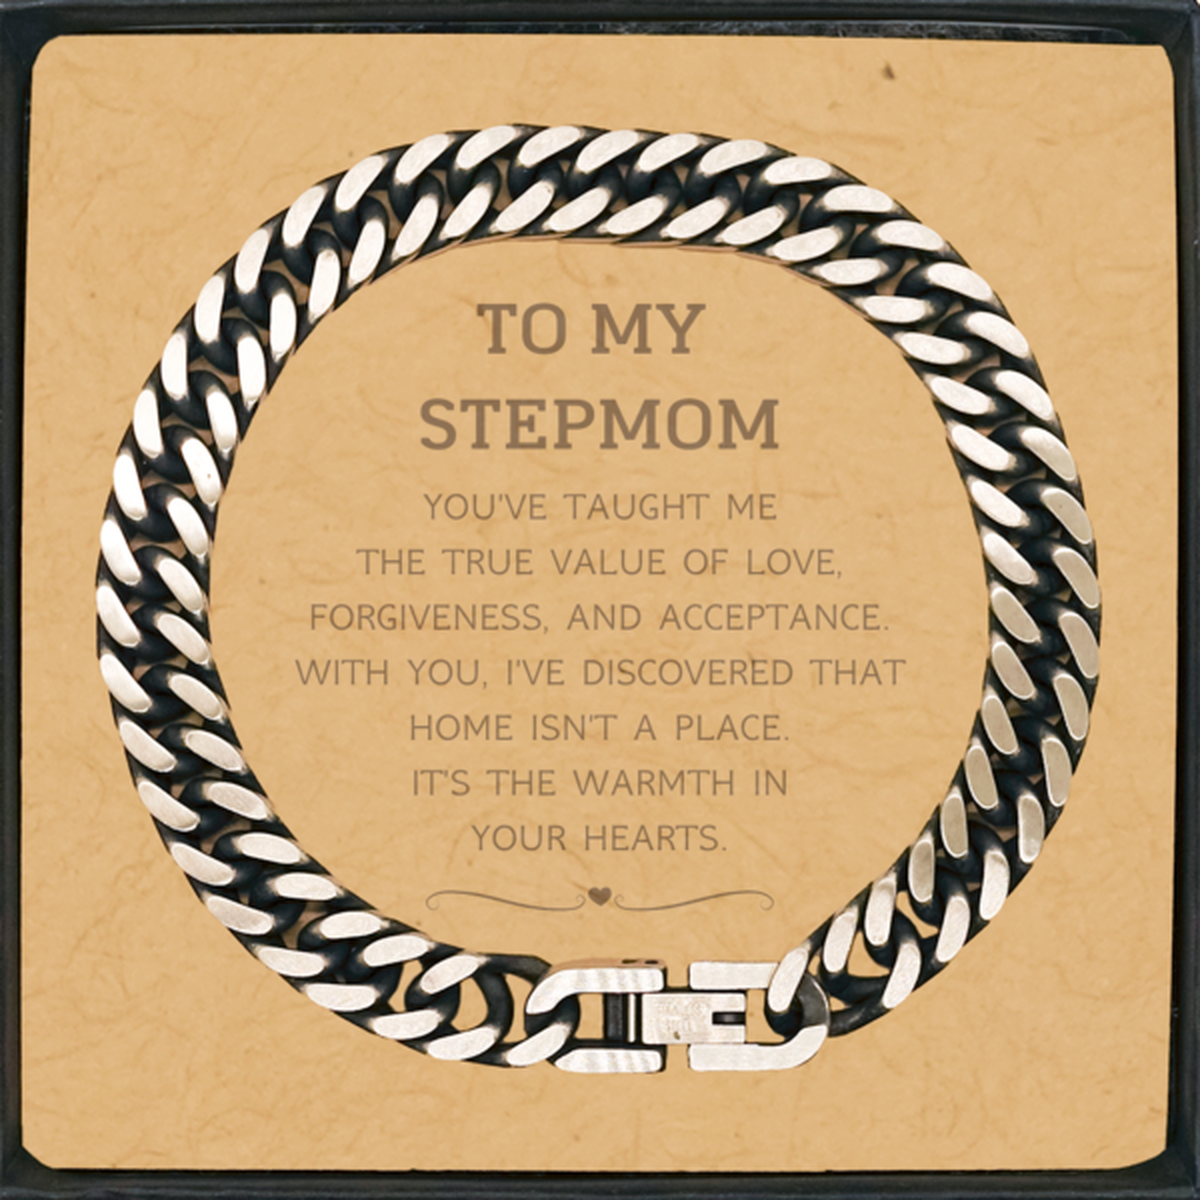 To My Stepmom Gifts, You've taught me the true value of love, Thank You Gifts For Stepmom, Birthday Cuban Link Chain Bracelet For Stepmom